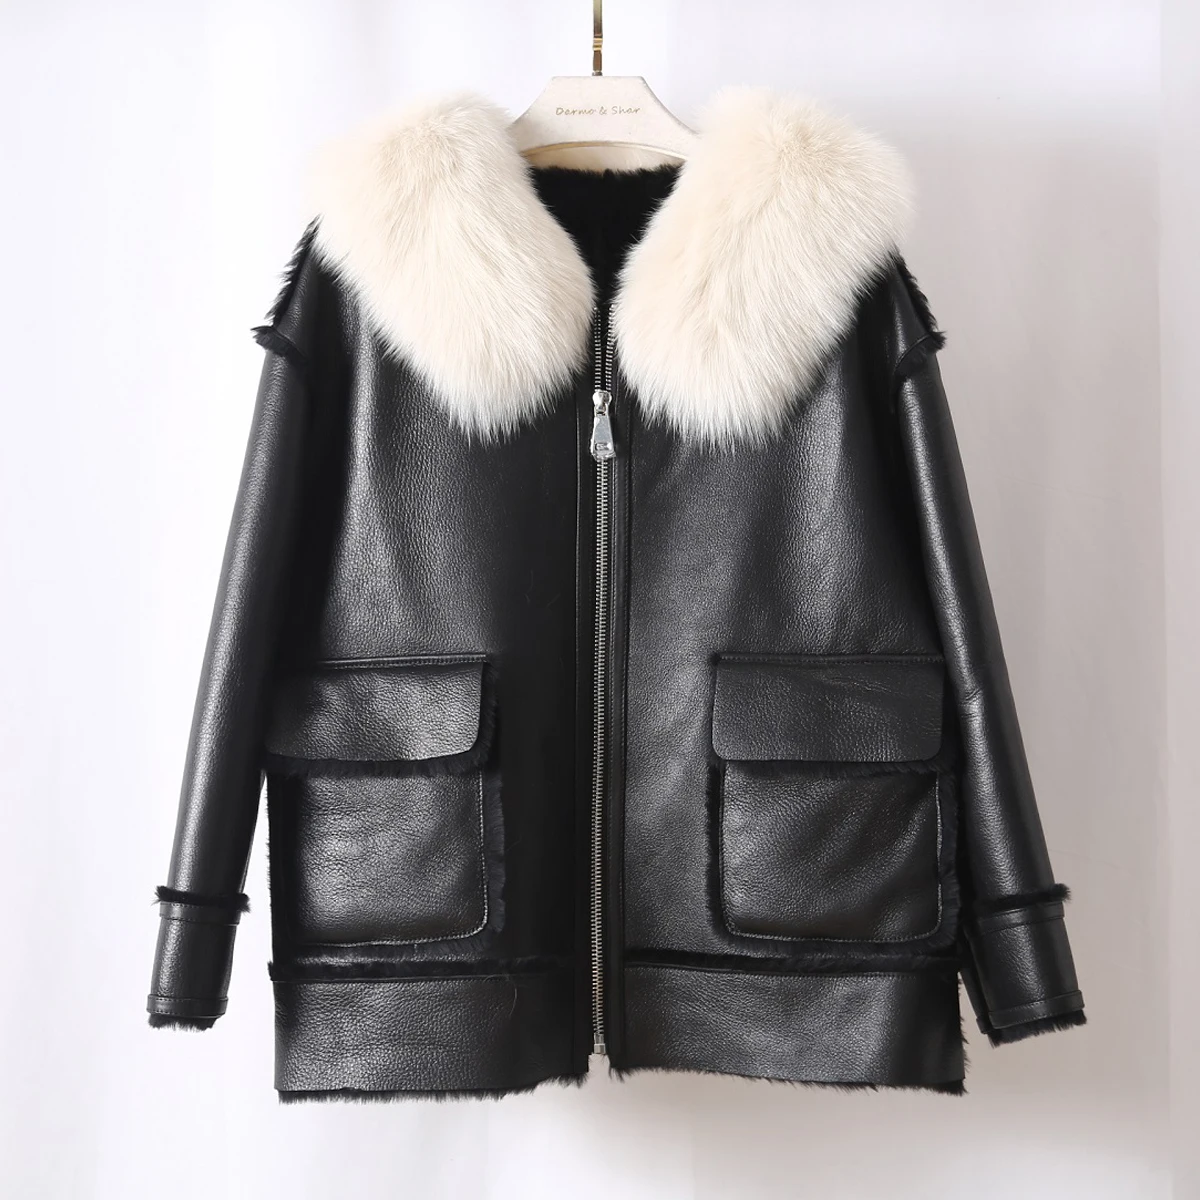 

OFTBUY 2021 Double-faced Merino Sheep Fur Genuine Leather Coat Real Natural Fox Fur Collar Winter Jacket Women Warm Outerwear